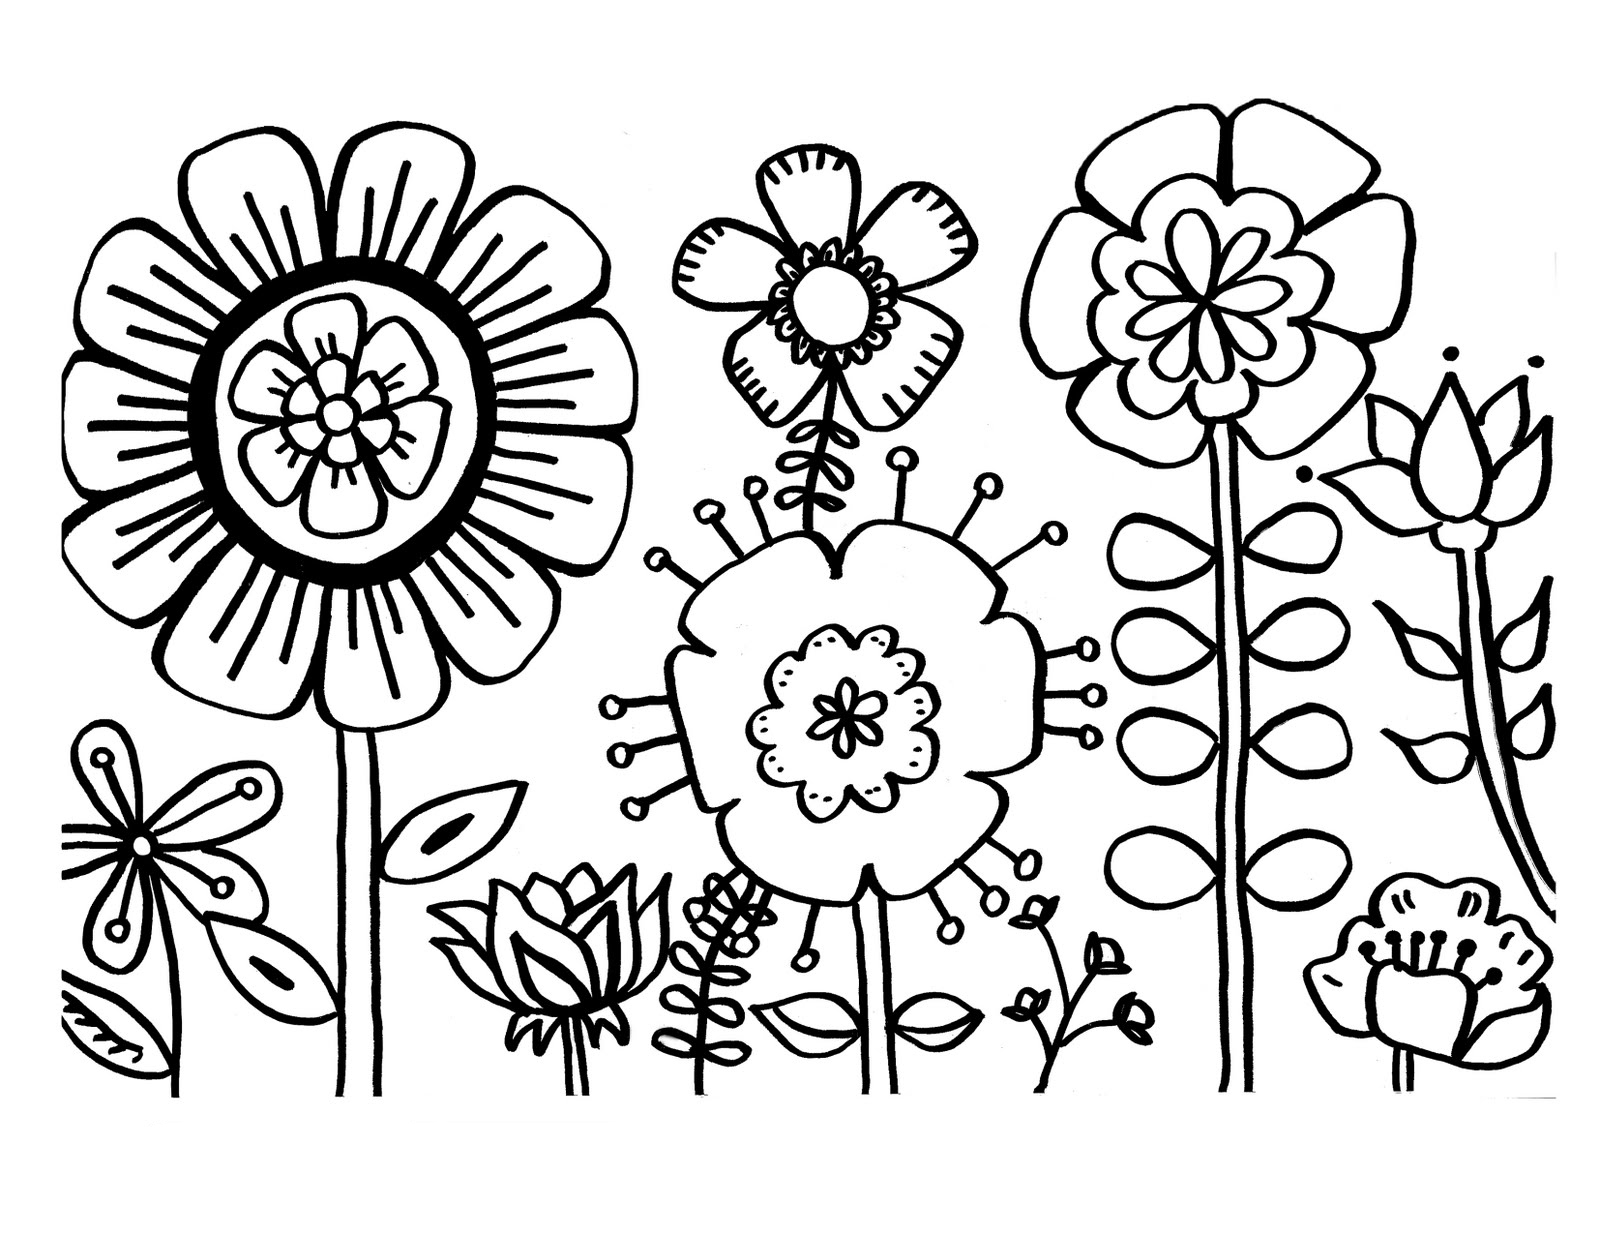 flower coloring sheets for preschoolers